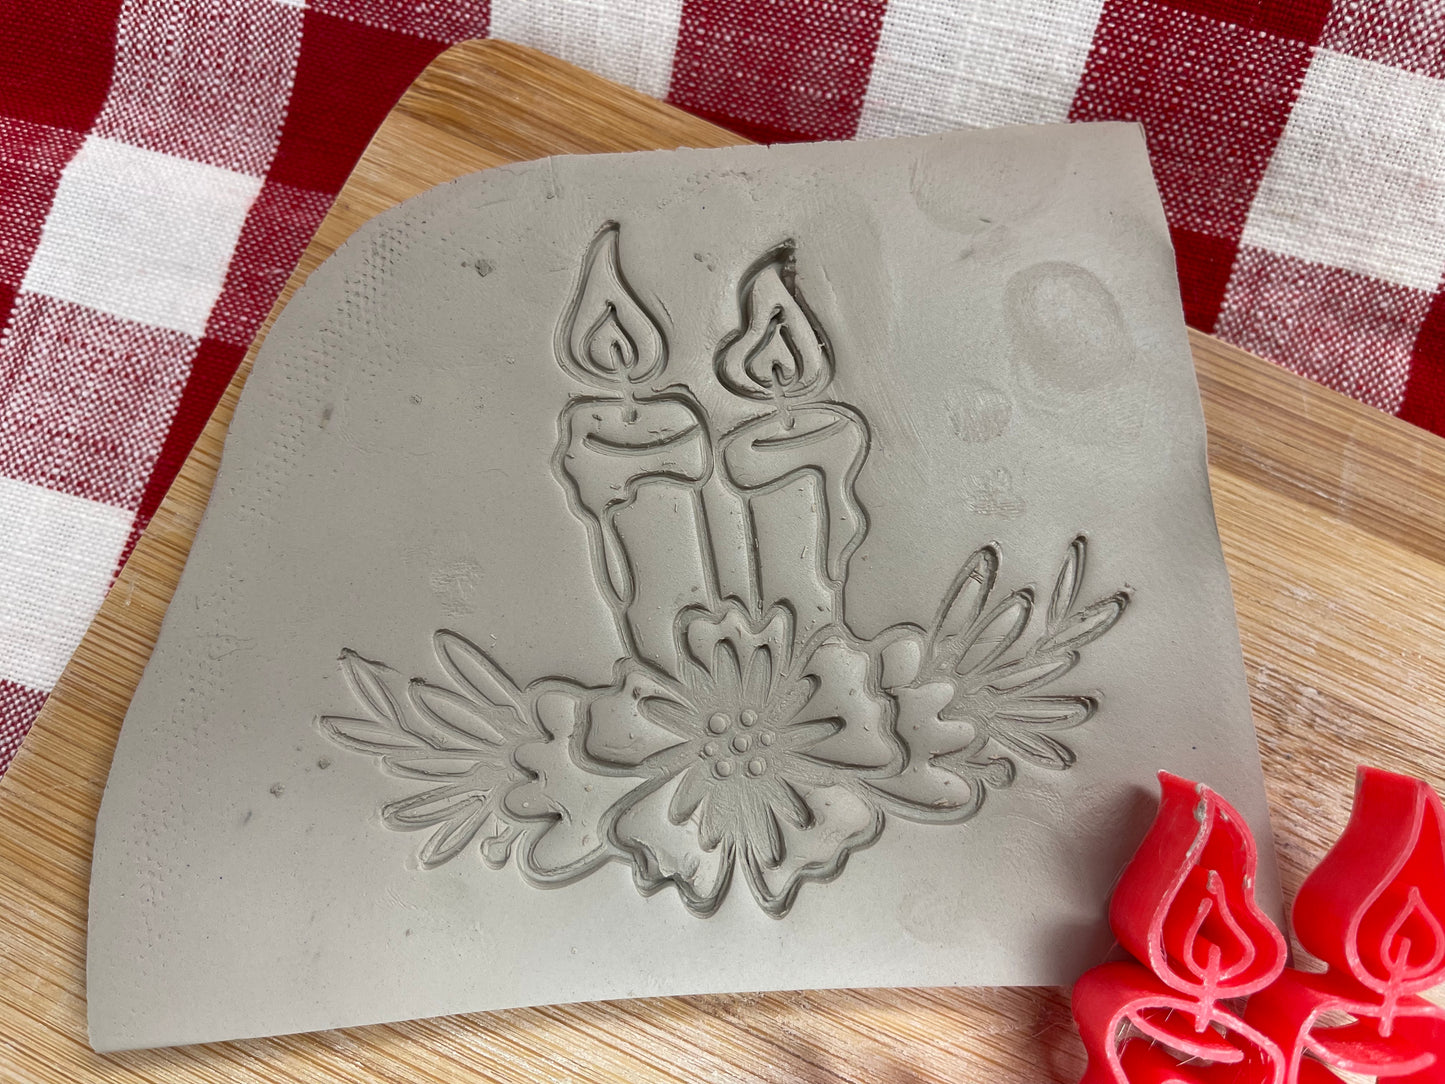 Candle with Flower stamp, Day of the Dead design, pottery tool - multiple sizes